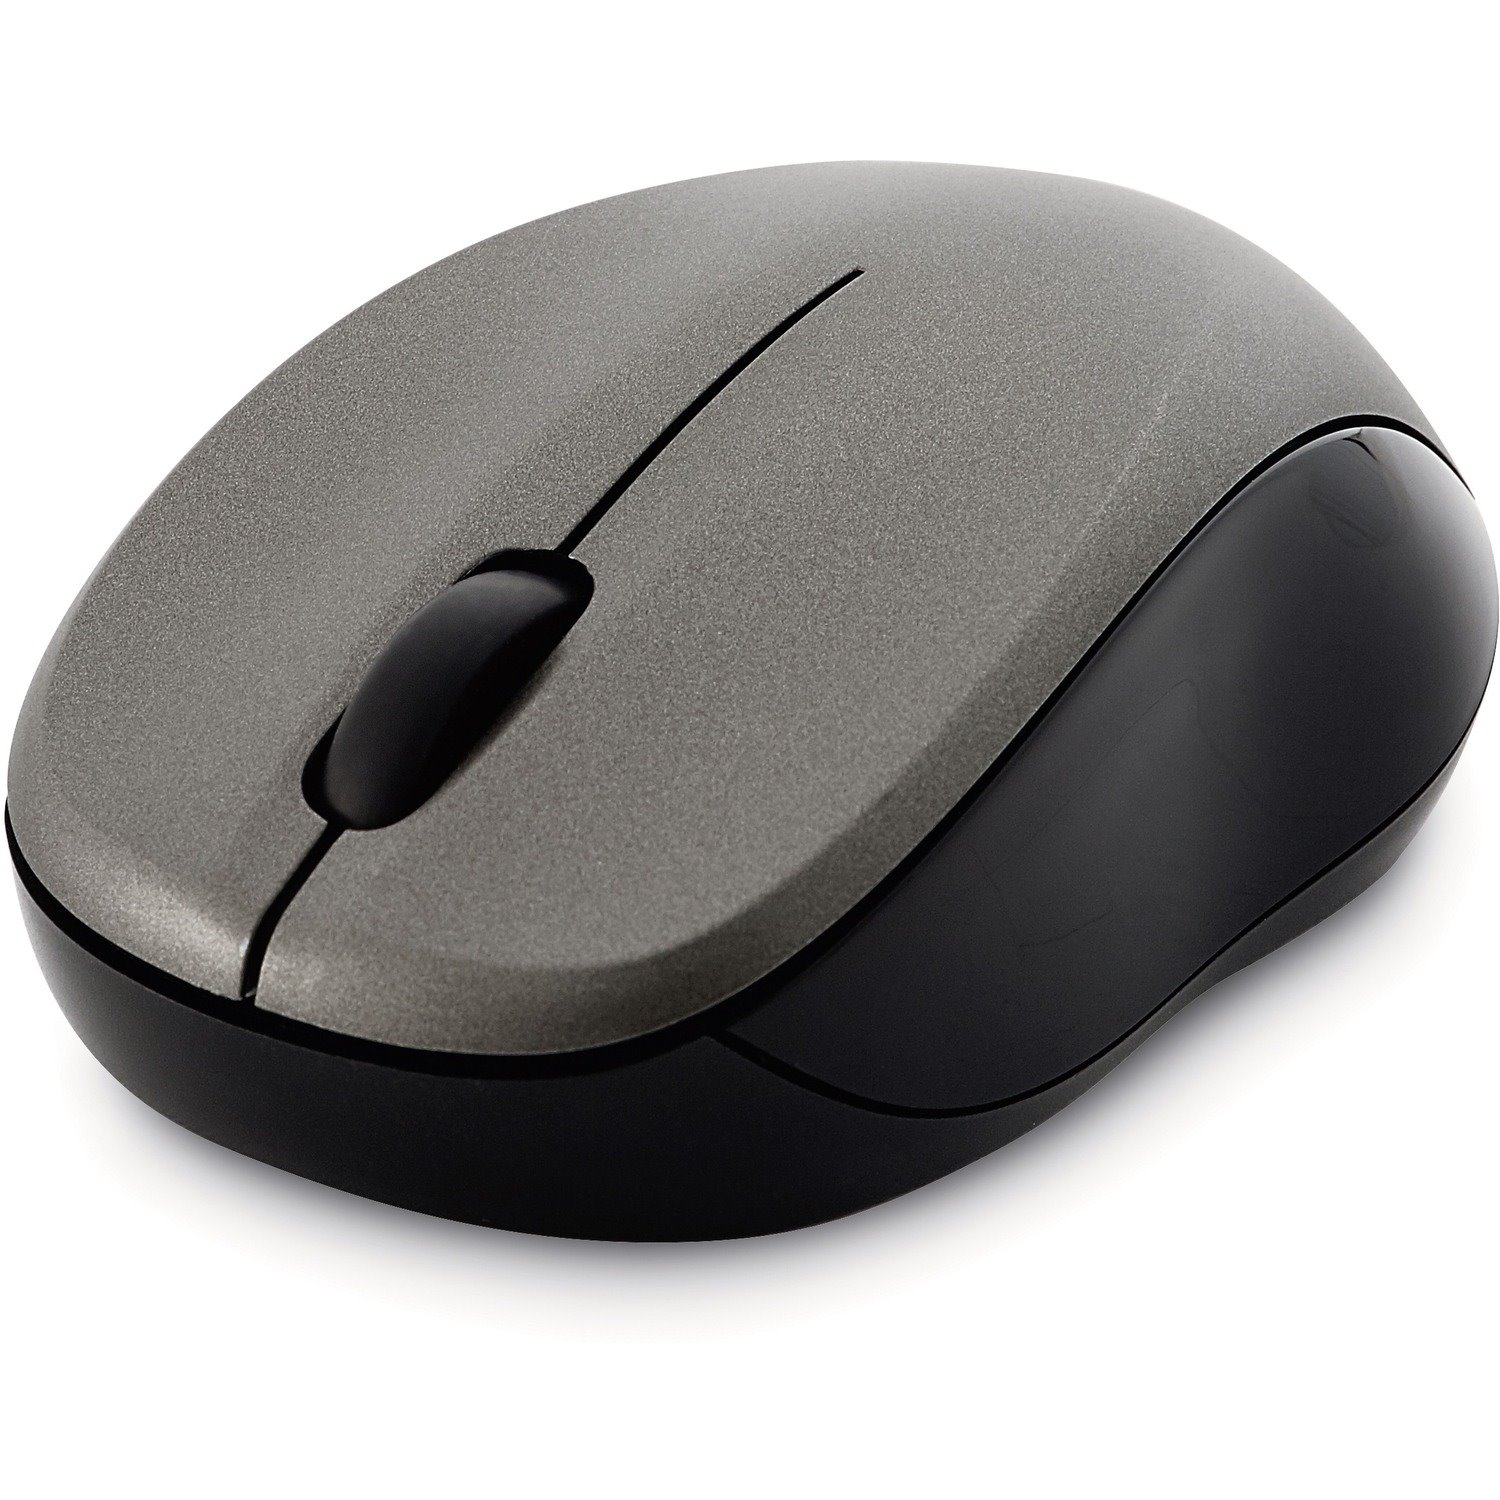 Verbatim Silent Mouse - Radio Frequency - USB Type A - Blue LED/Optical - 3 Button(s) - Graphite - 1 Pack